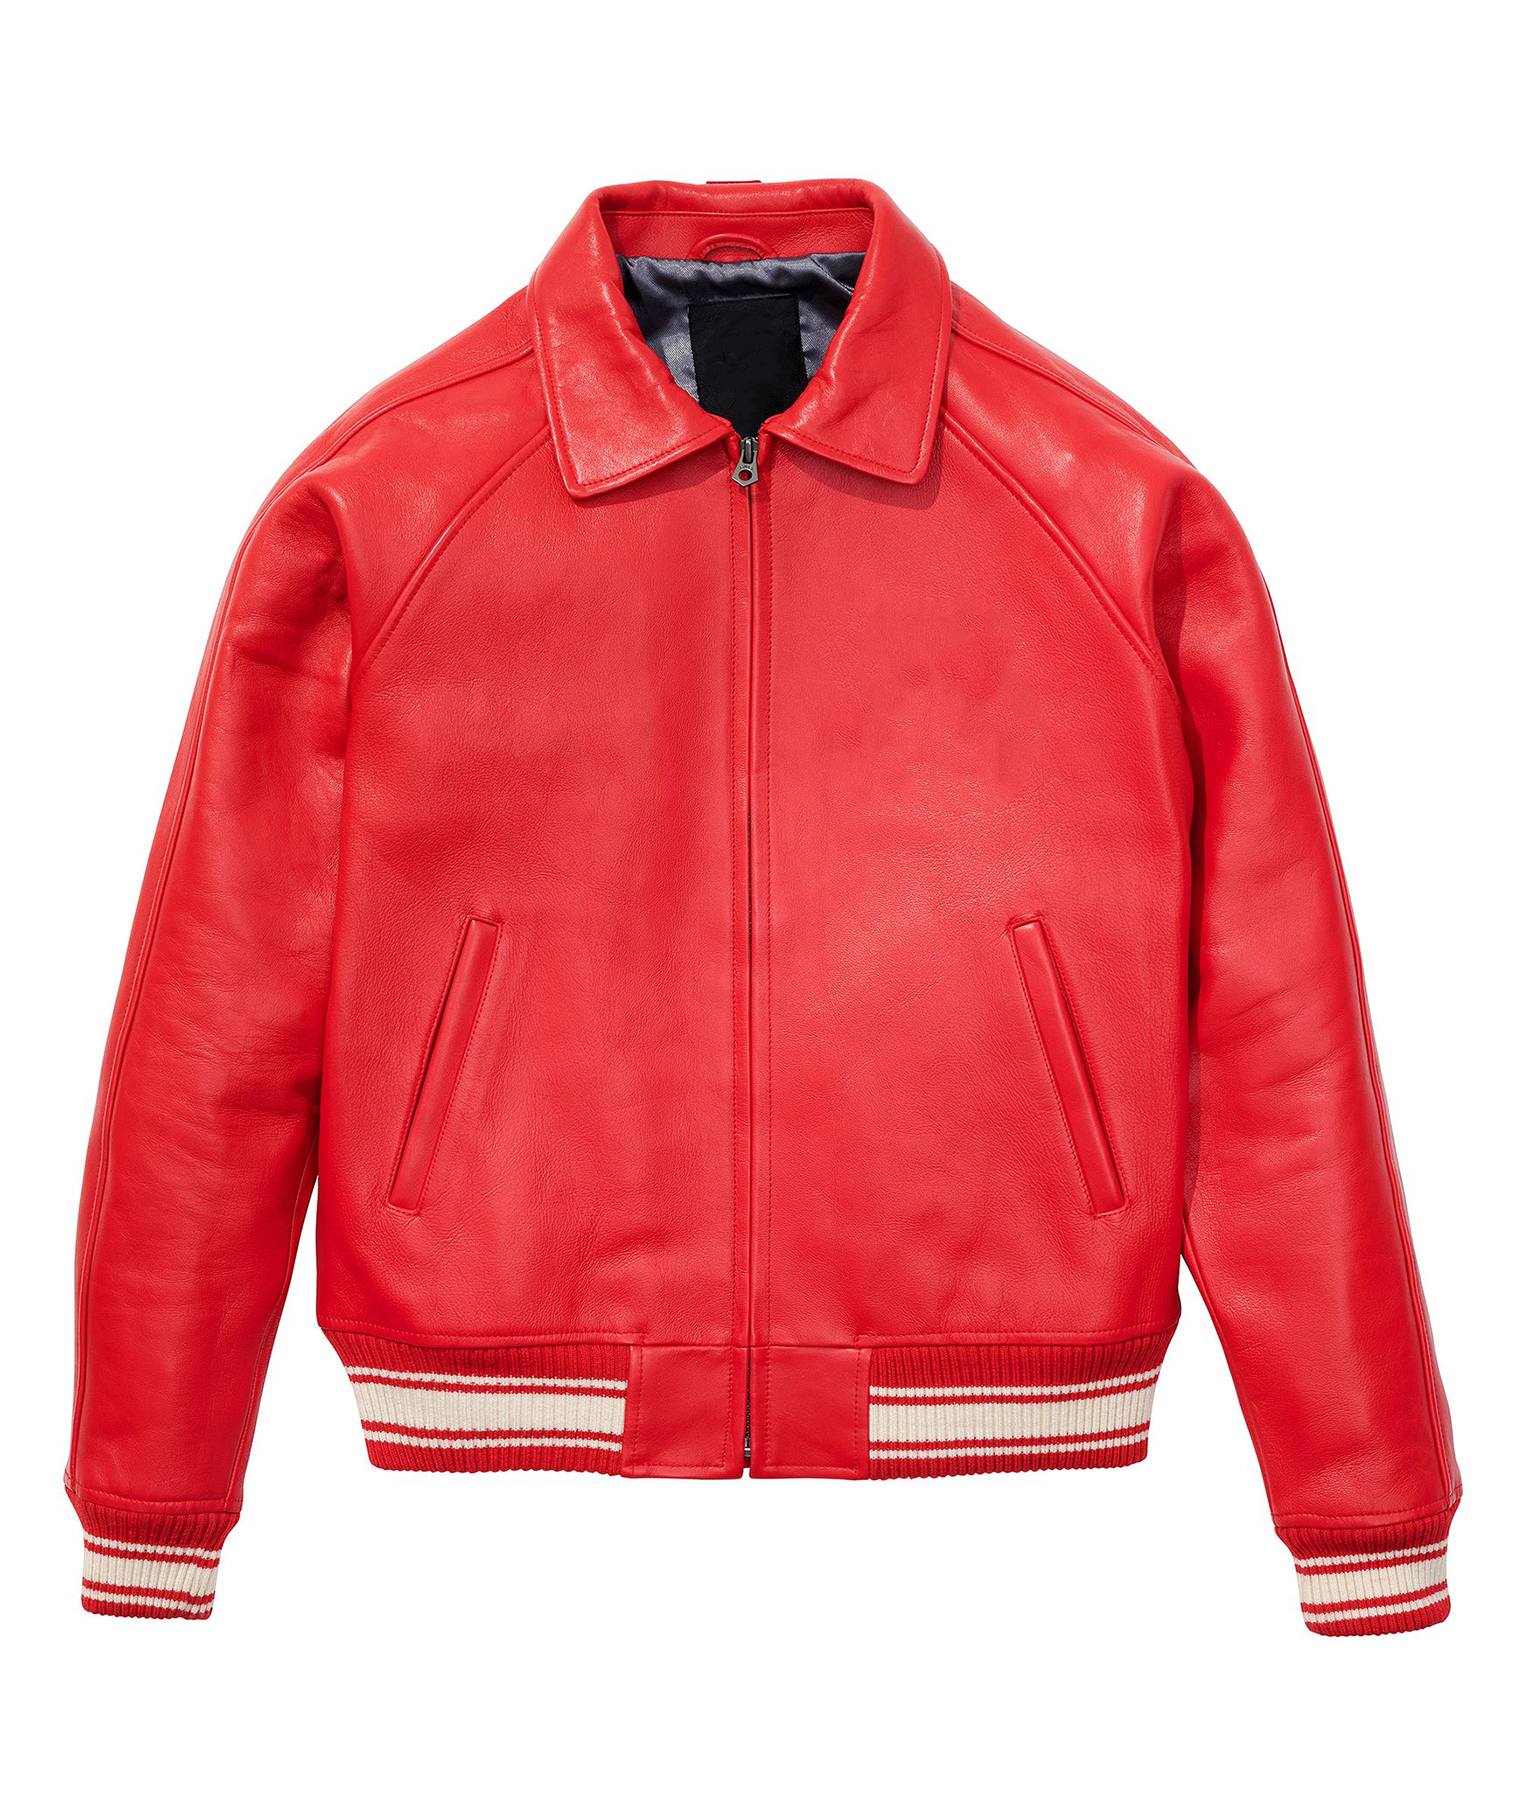 All Americans 1975 Red Bomber Jacket (1)